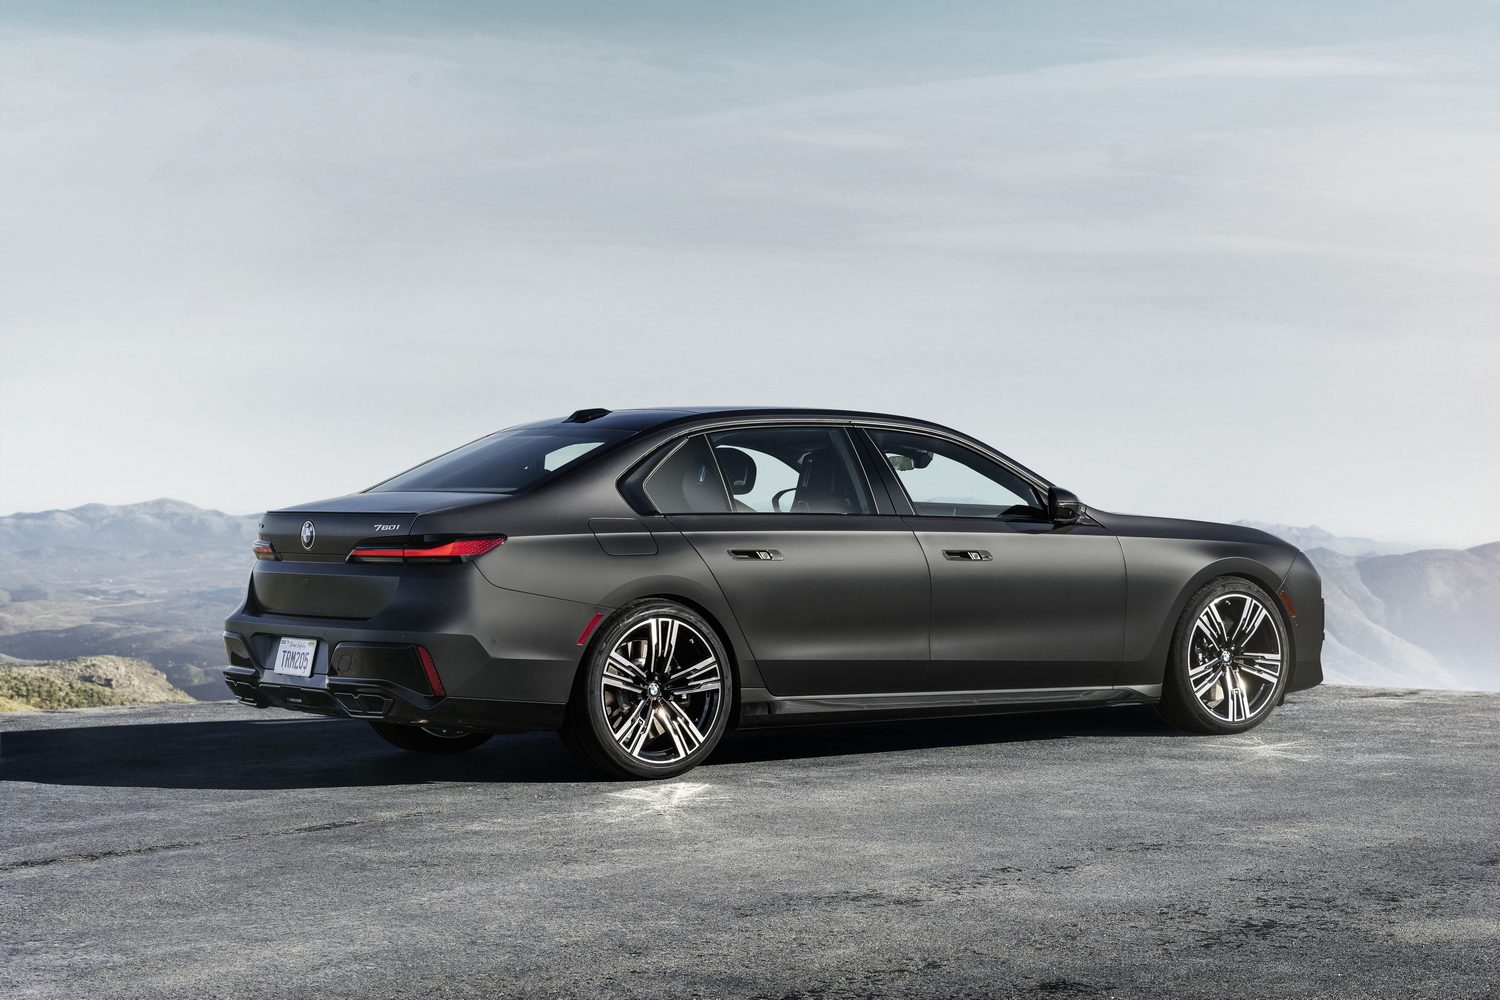 New all-electric BMW 7 Series revealed